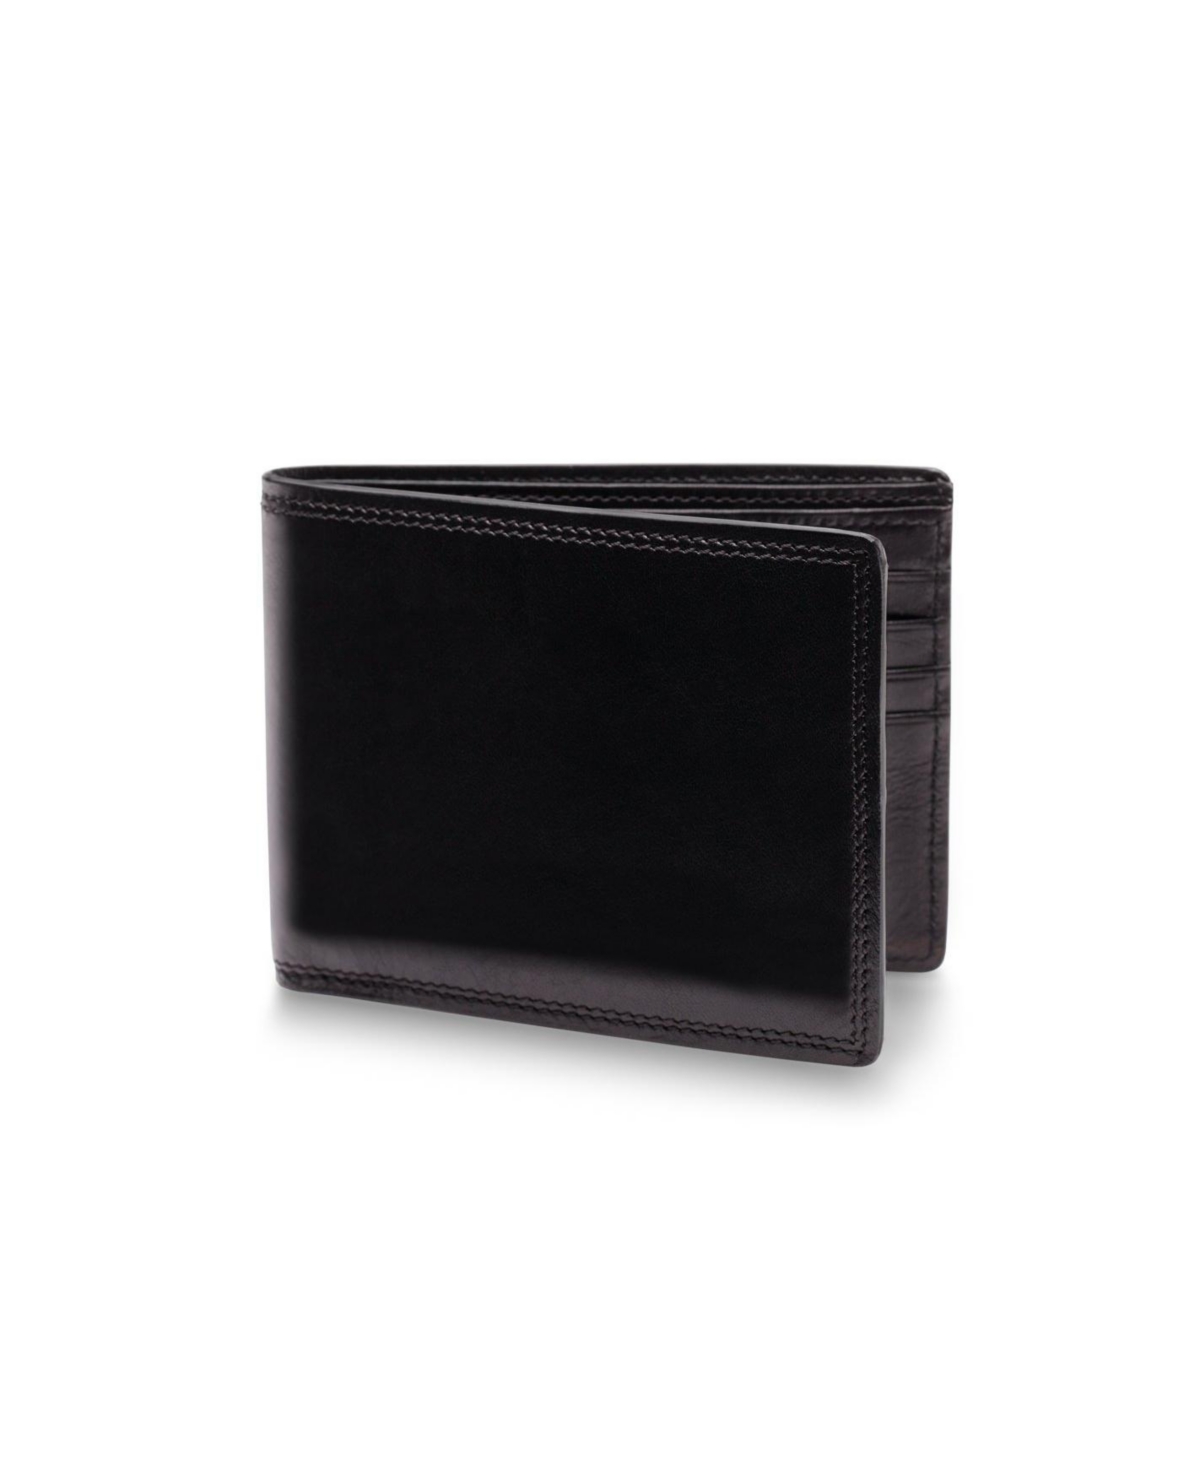 Dolce Old Leather 8 Pocket Deluxe Executive Wallet - Black